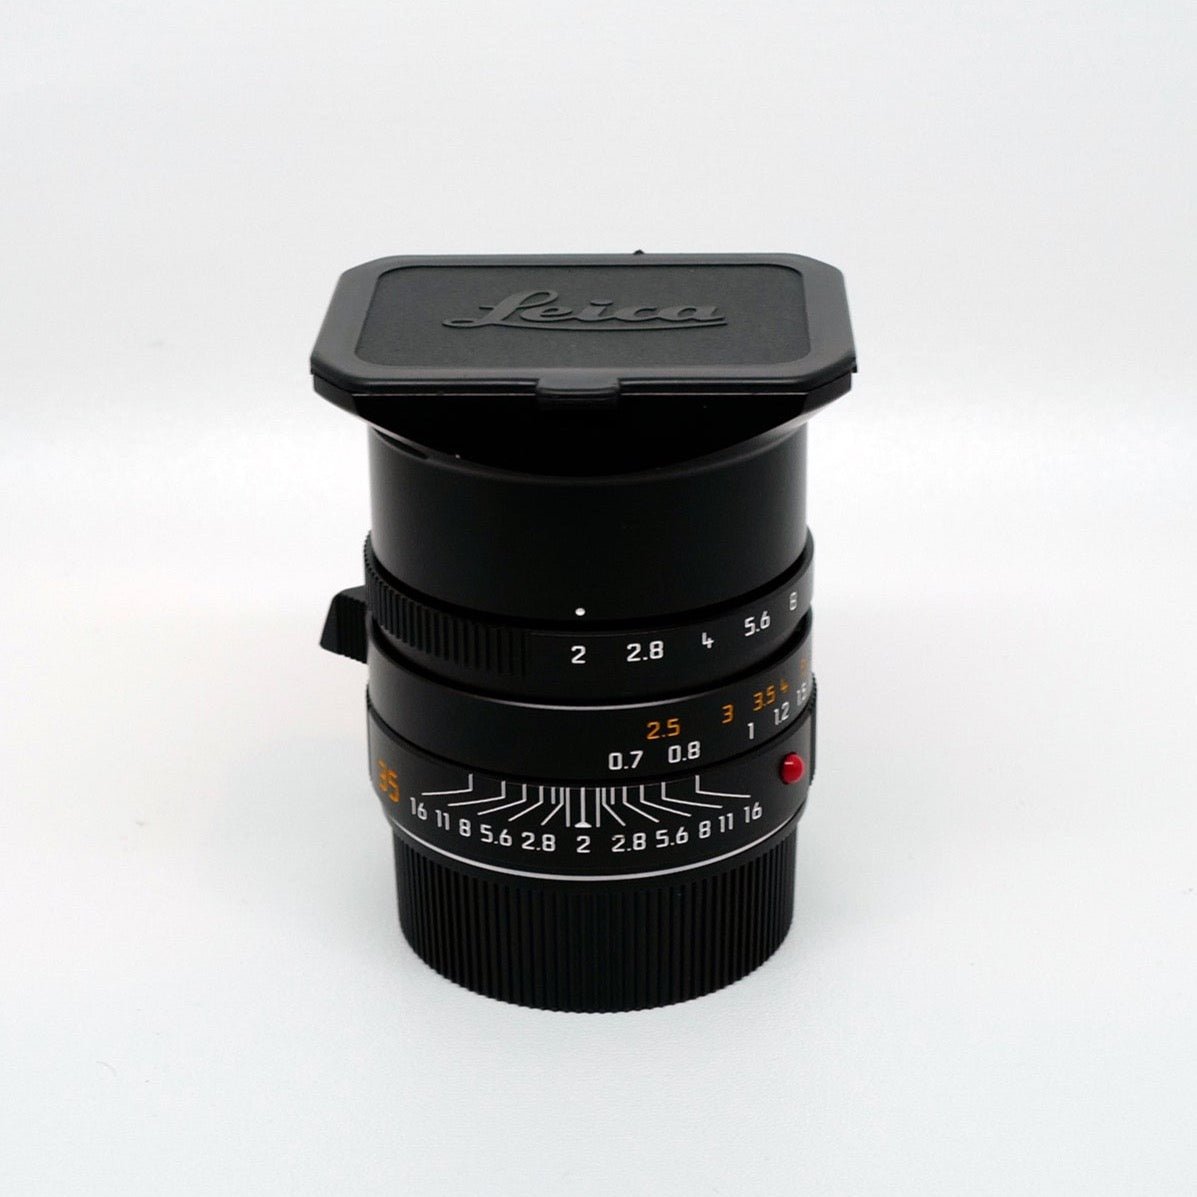 Pre-Owned Leica SUMMICRON-M 35 f/2 ASPH. Black anodized